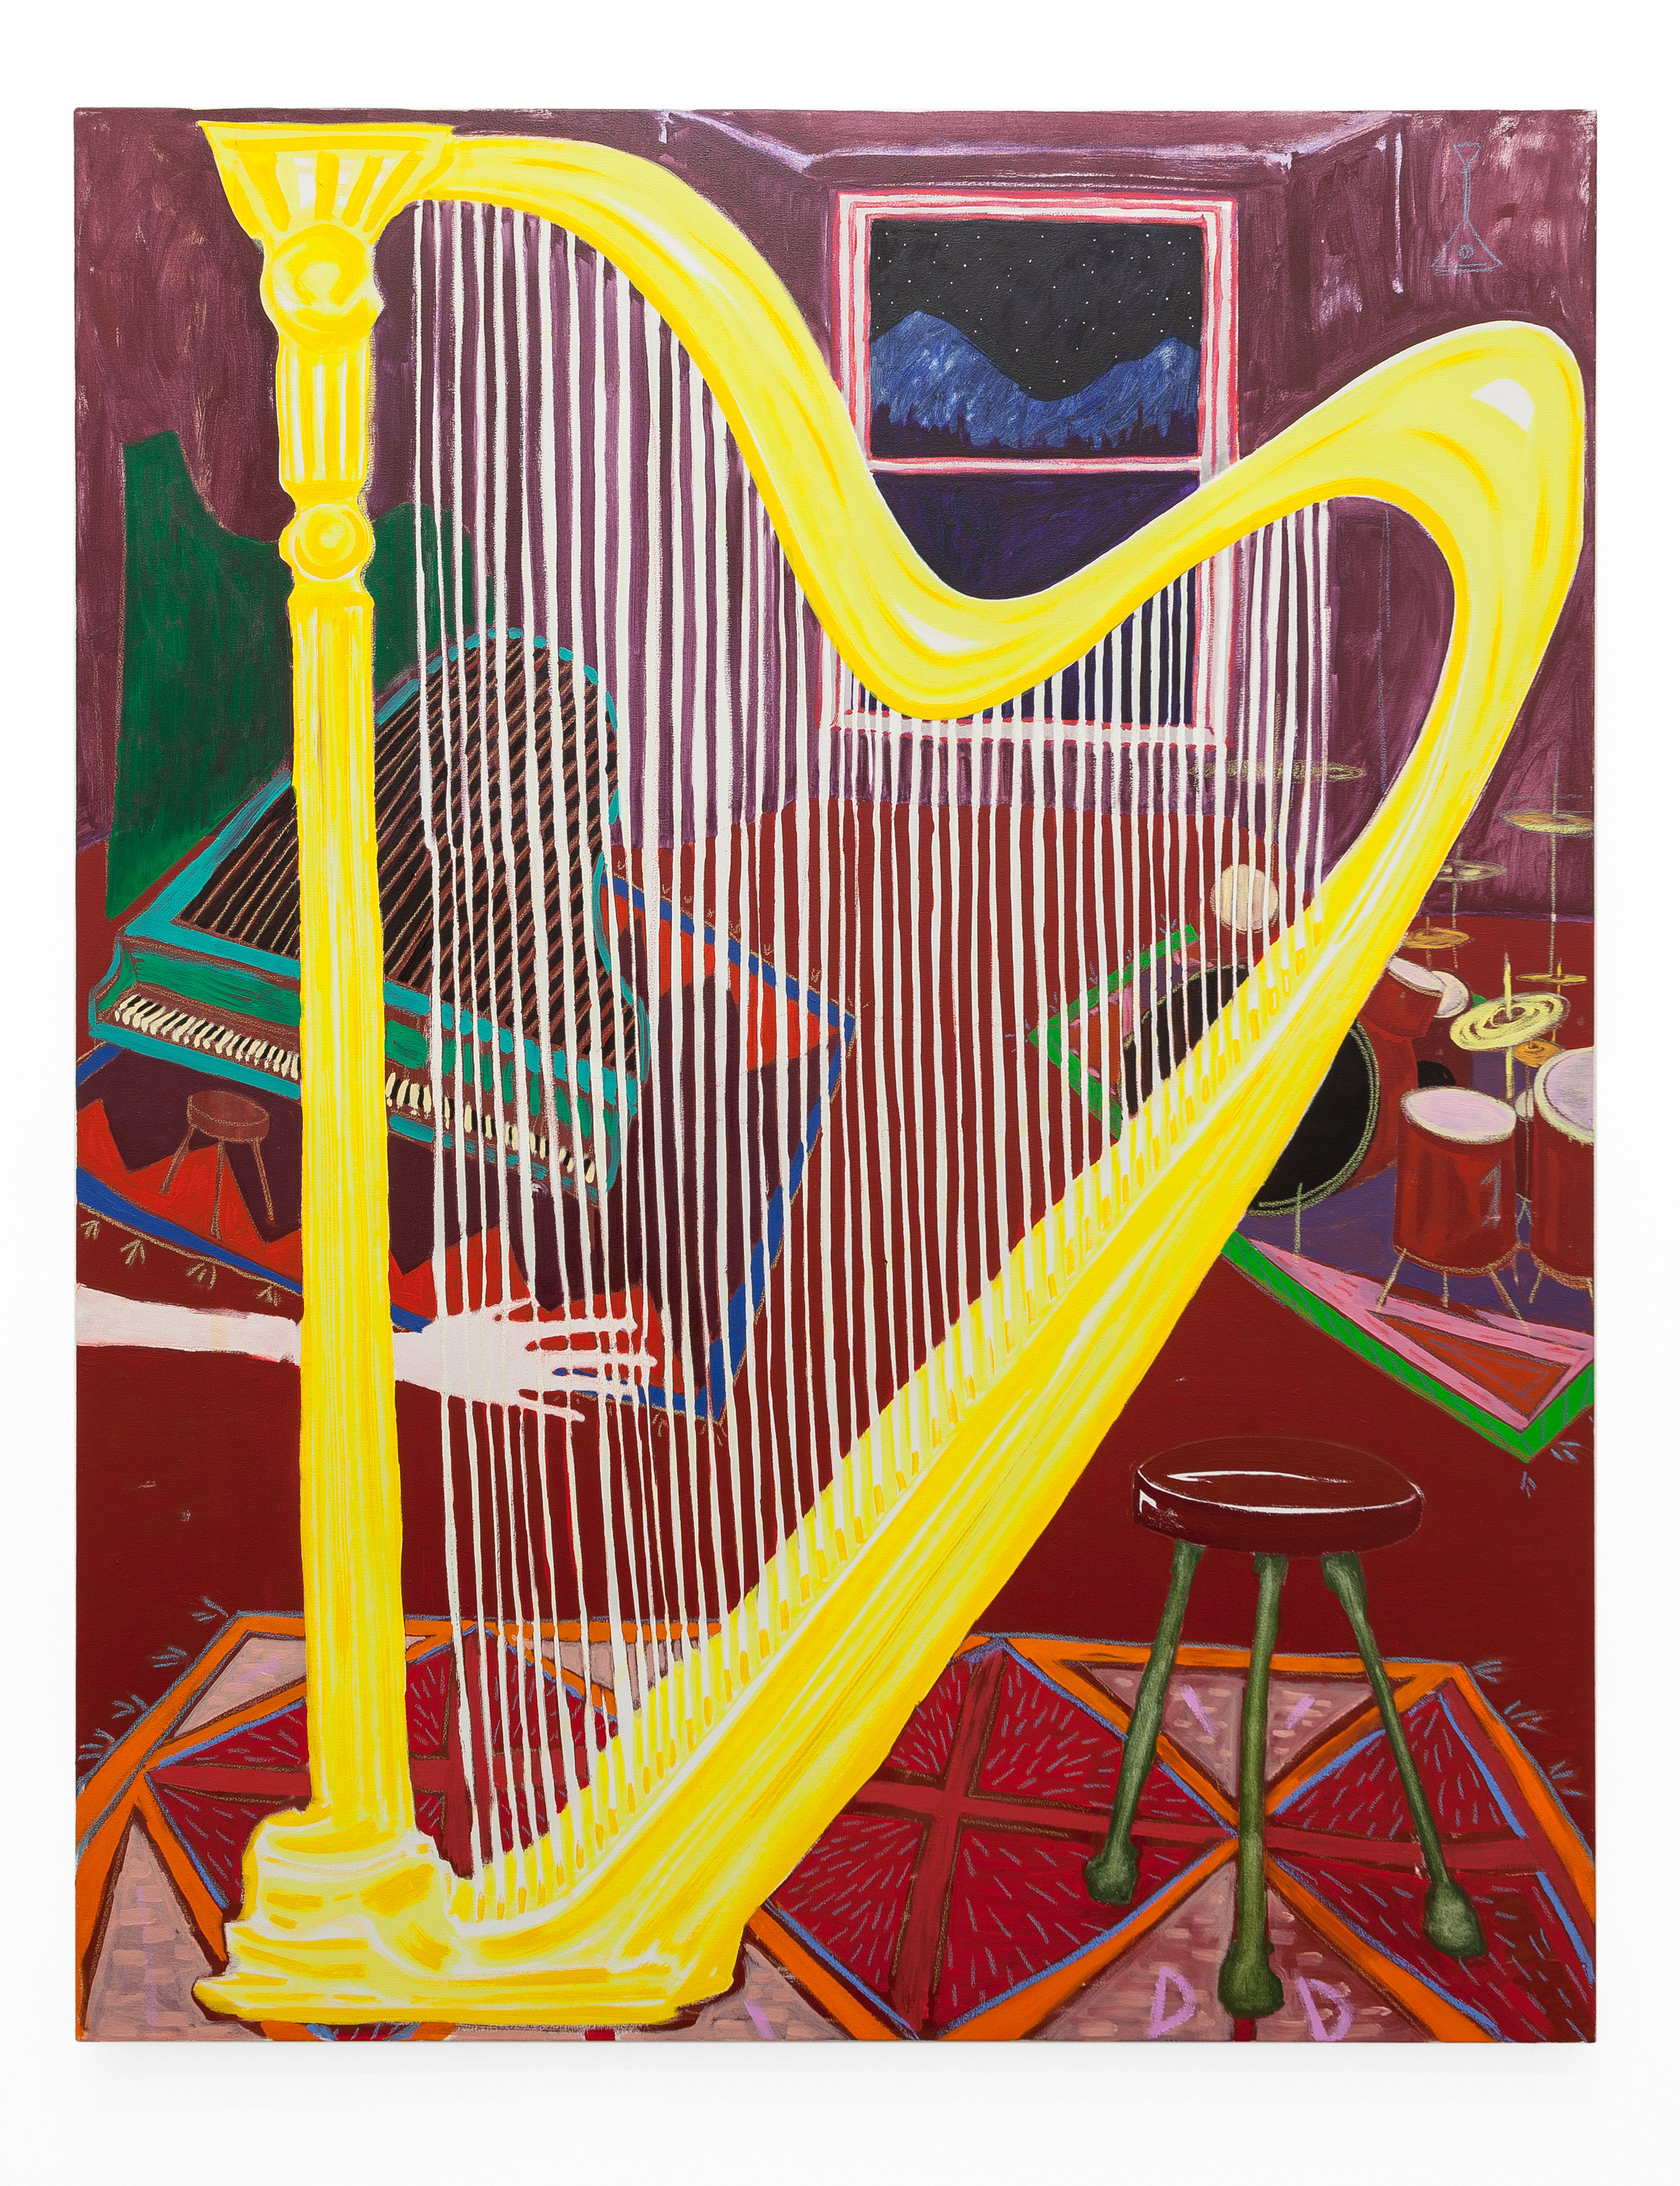  The Music Room (please don't touch the harp)  Oil on Cotton  150 x 110 cm  2016 